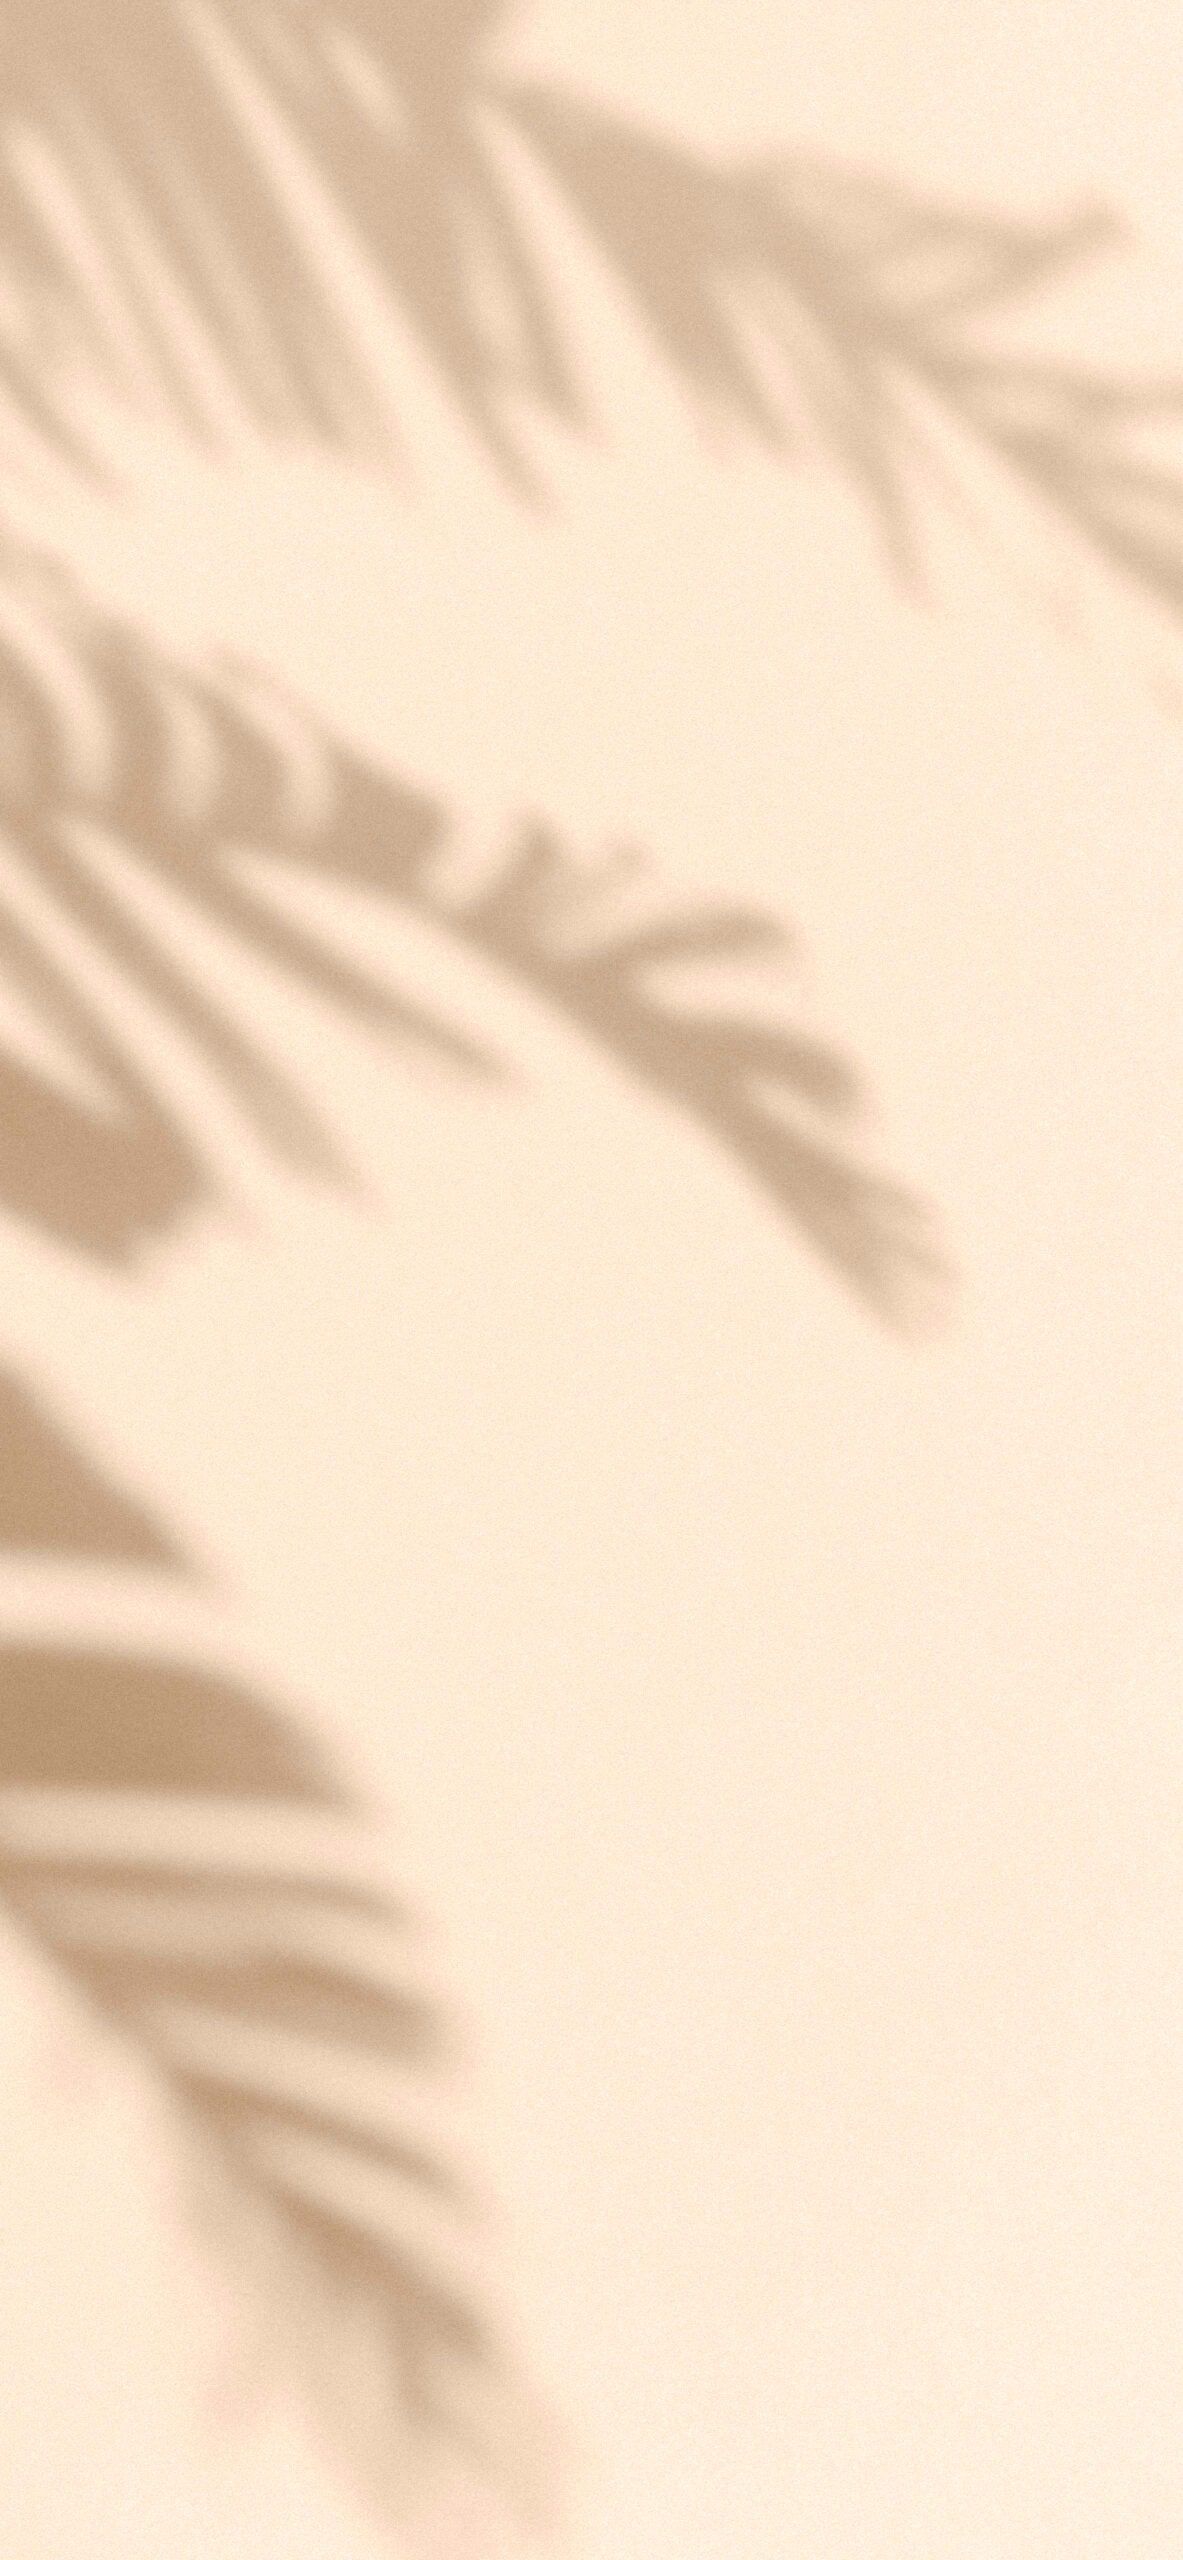 A light pink background with palm leaves - Shadow